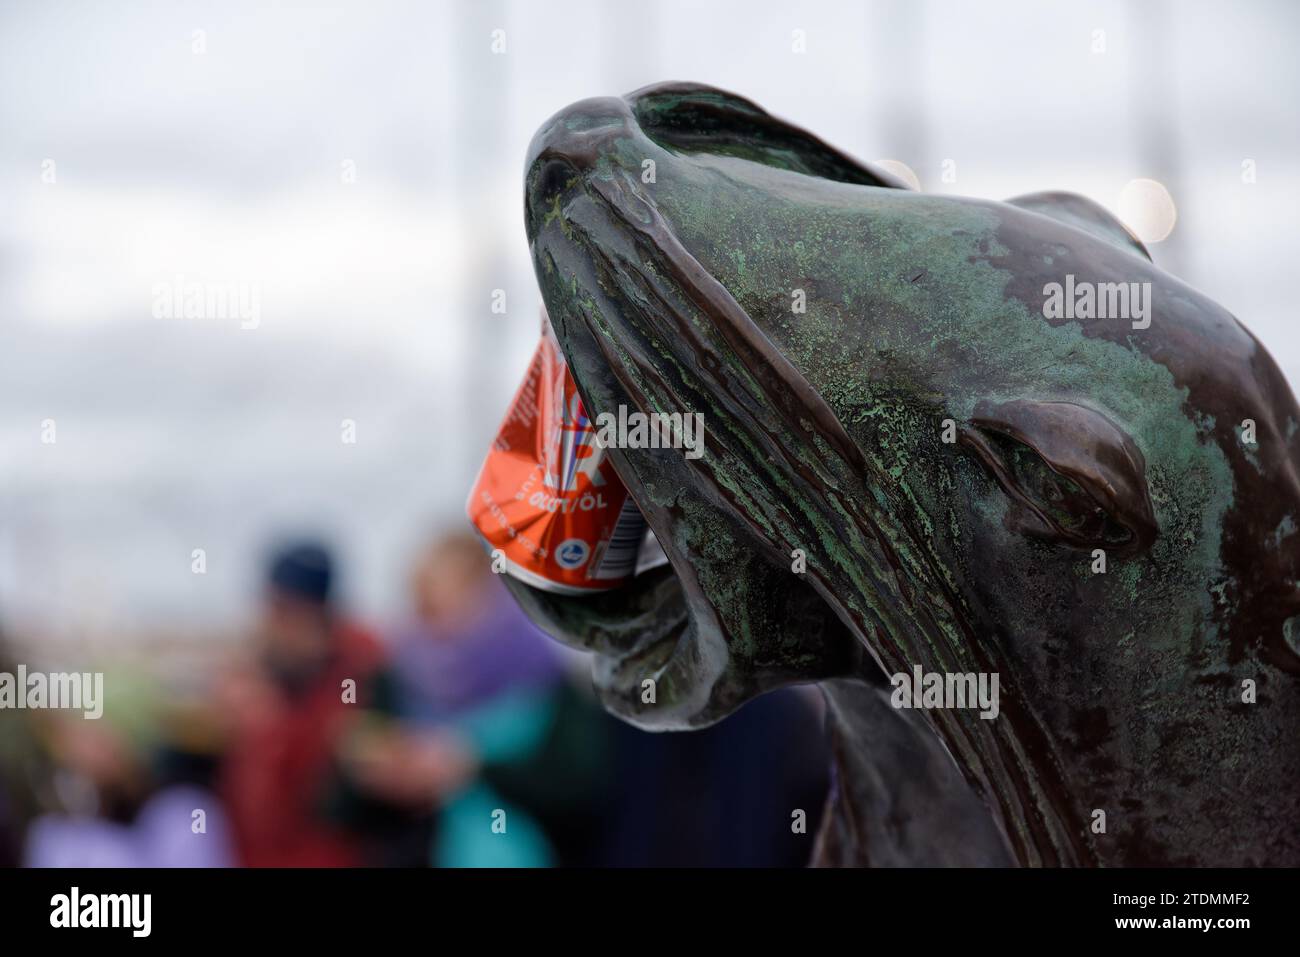 Helsinki, Finland - February 20, 2022: Compressed orange beer can struck to the mouth of a sea lion sculpture at the fountain surrounding the statue o Stock Photo